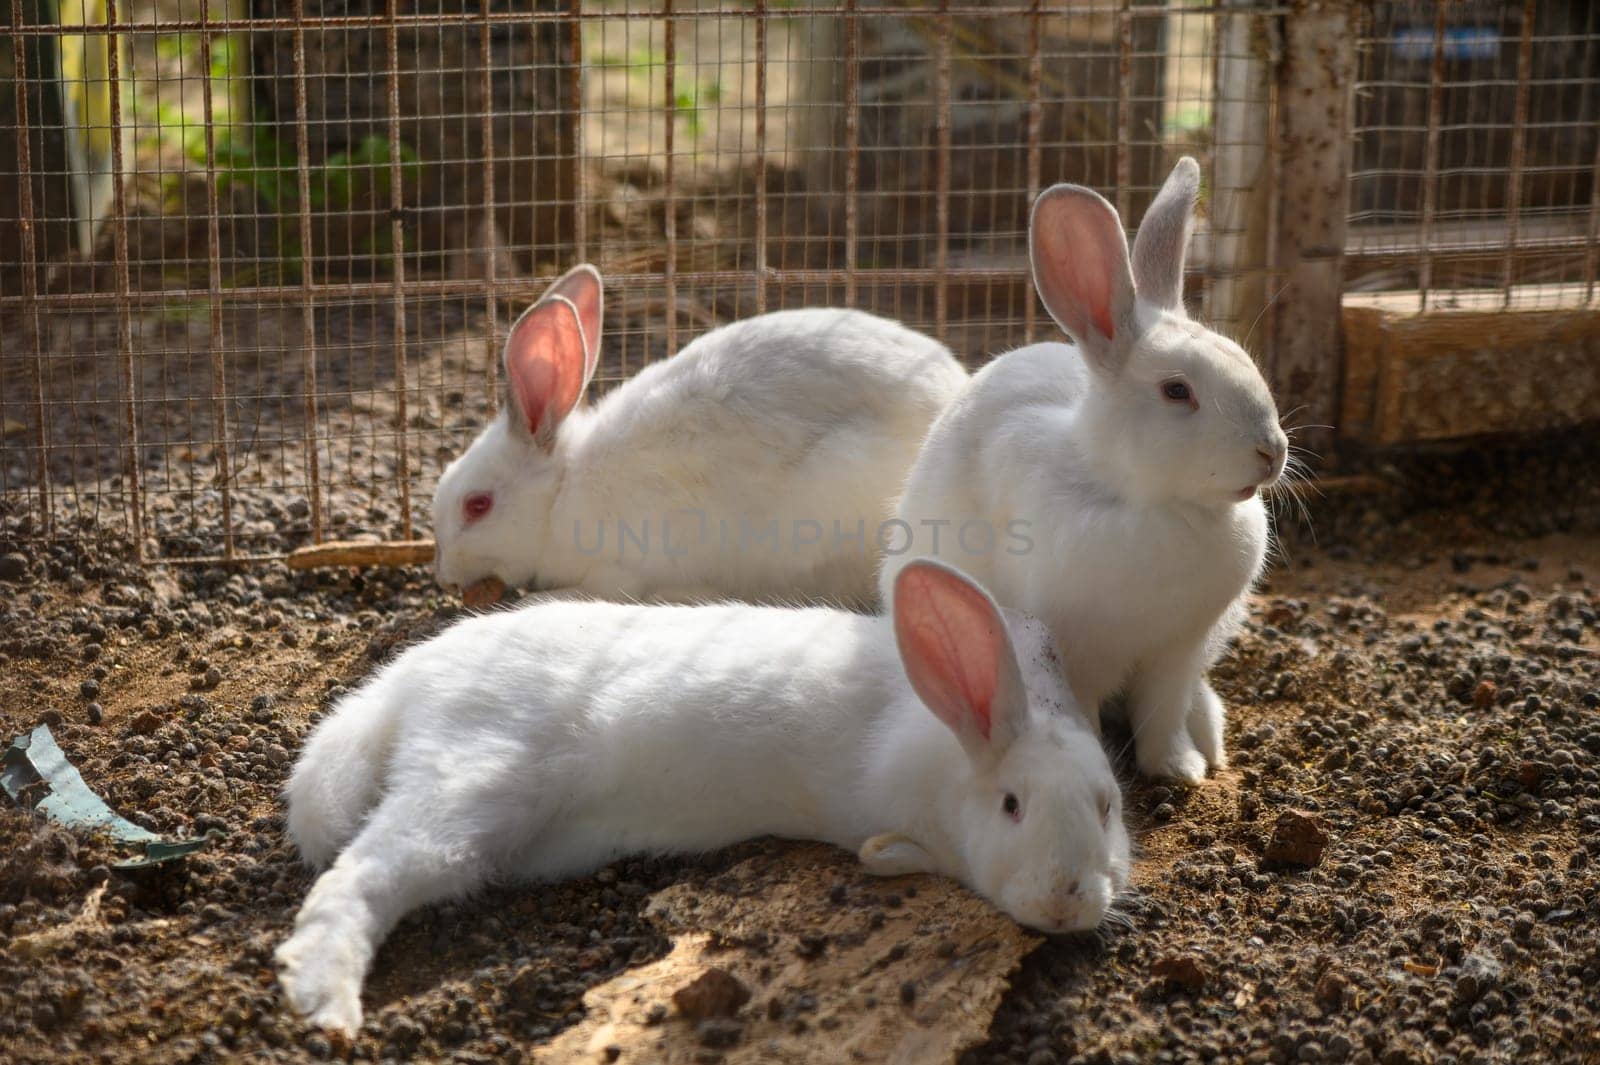 Three funny fluffy rabbits with silky and soft white fur in a cage.